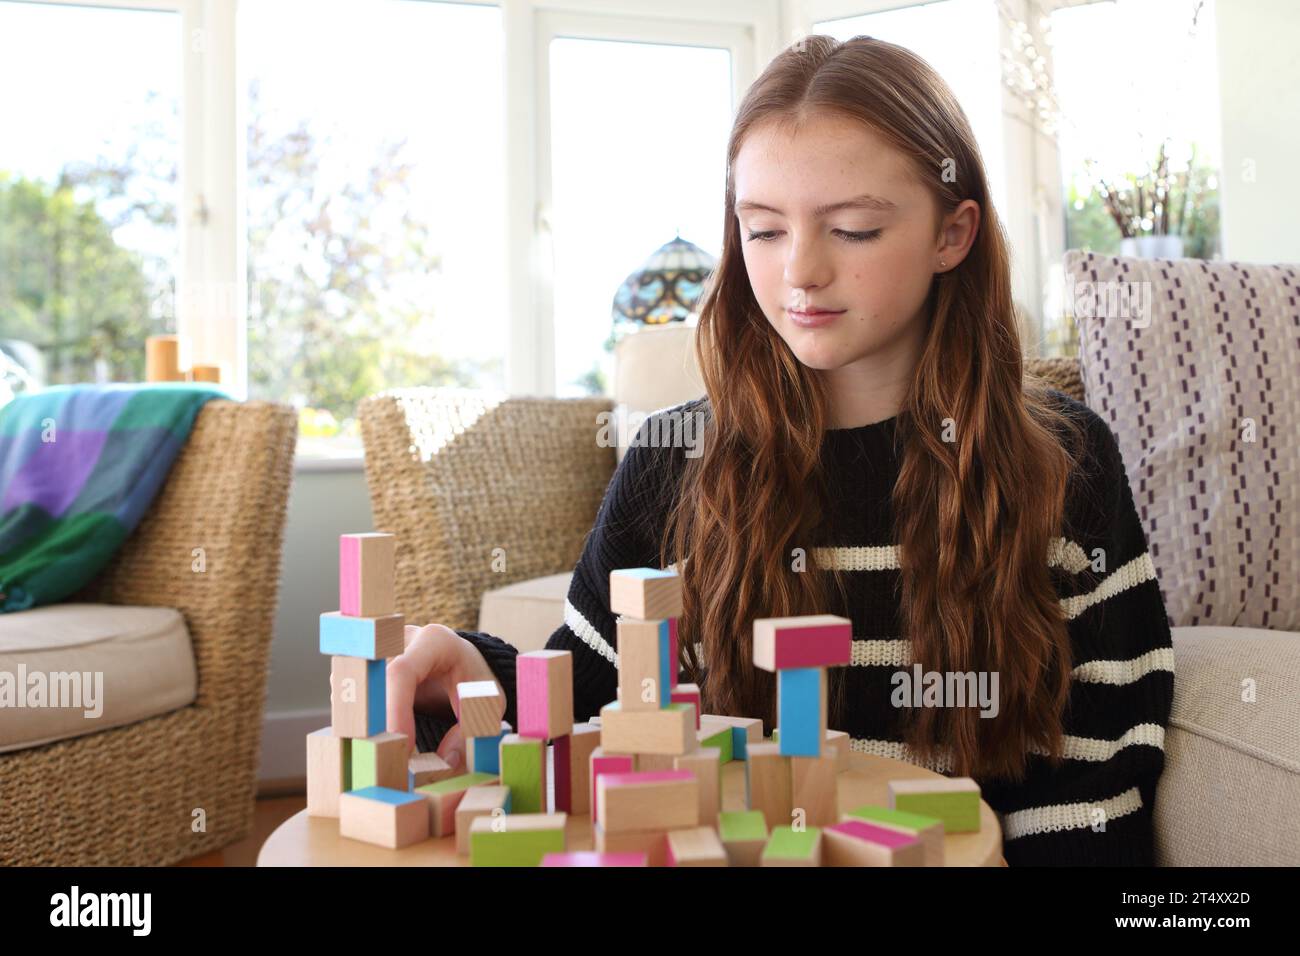 Teenage girl concentrating on building a wall of wooden blocks and towers Stock Photo